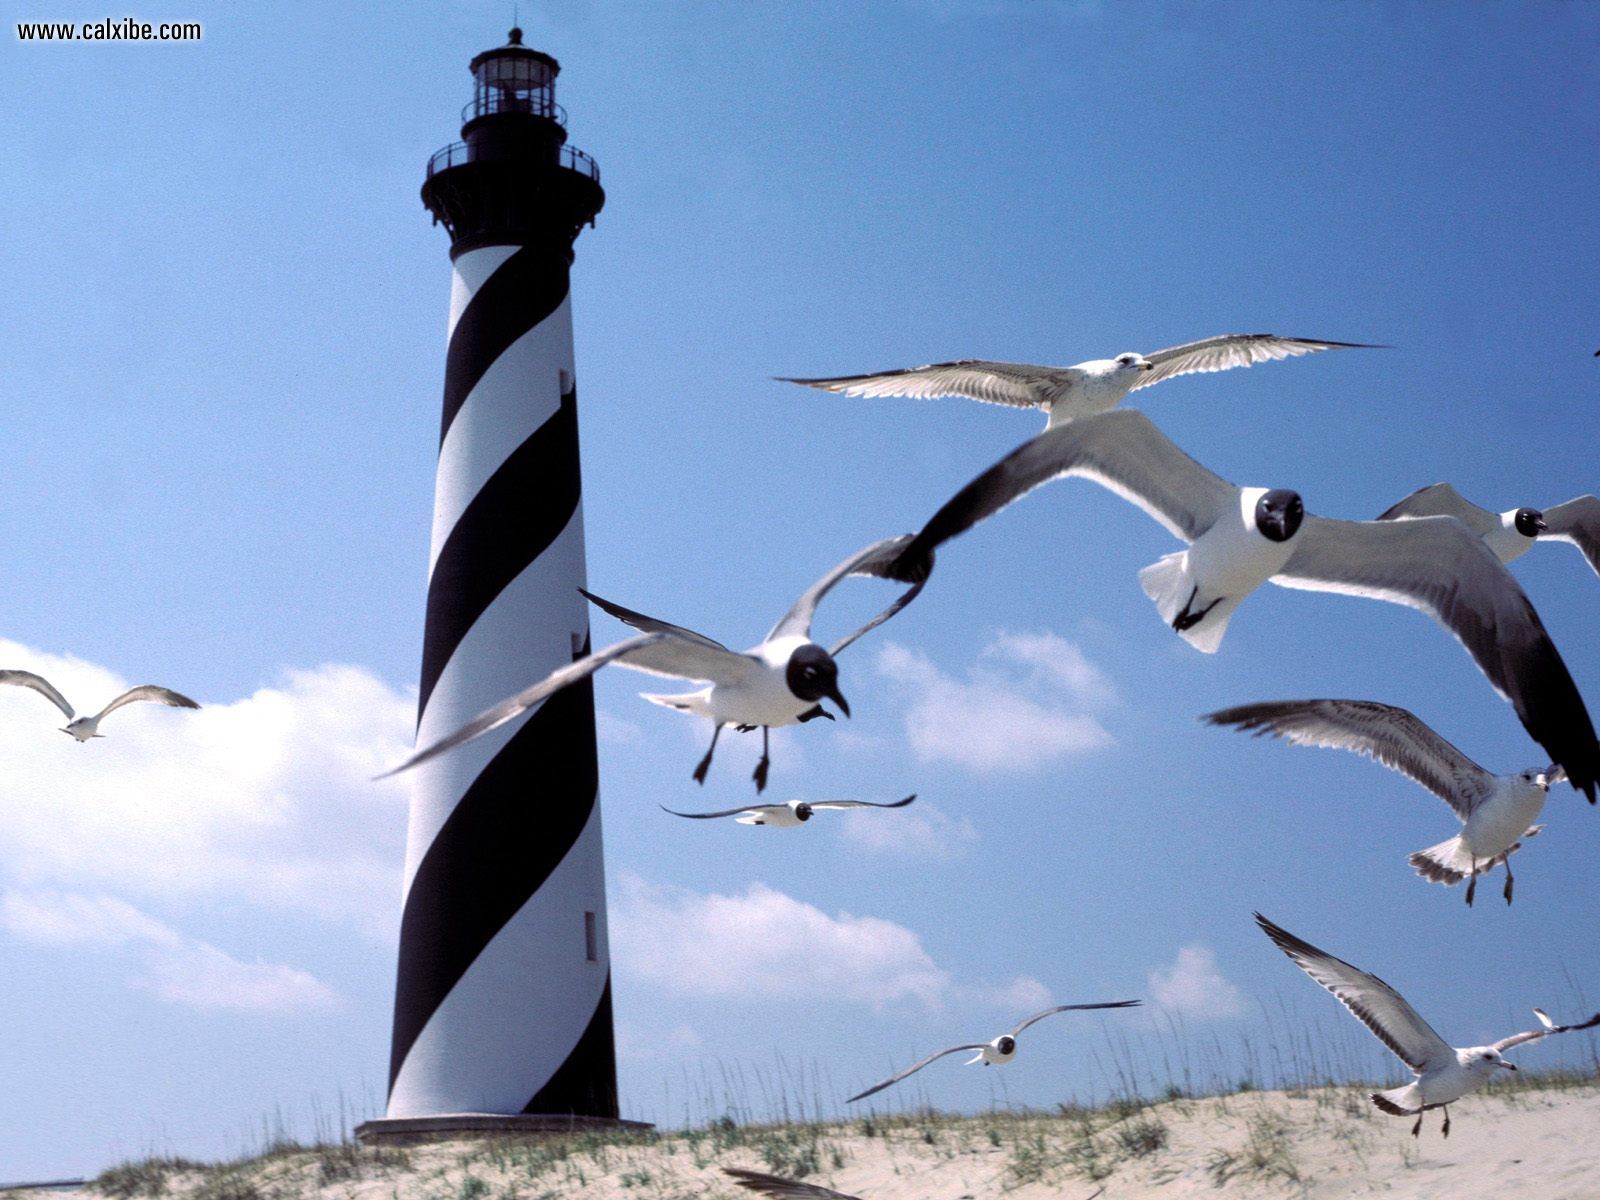  Cape Hatteras Lighthouse Outer Banks North Carolina in full screen 1600x1200